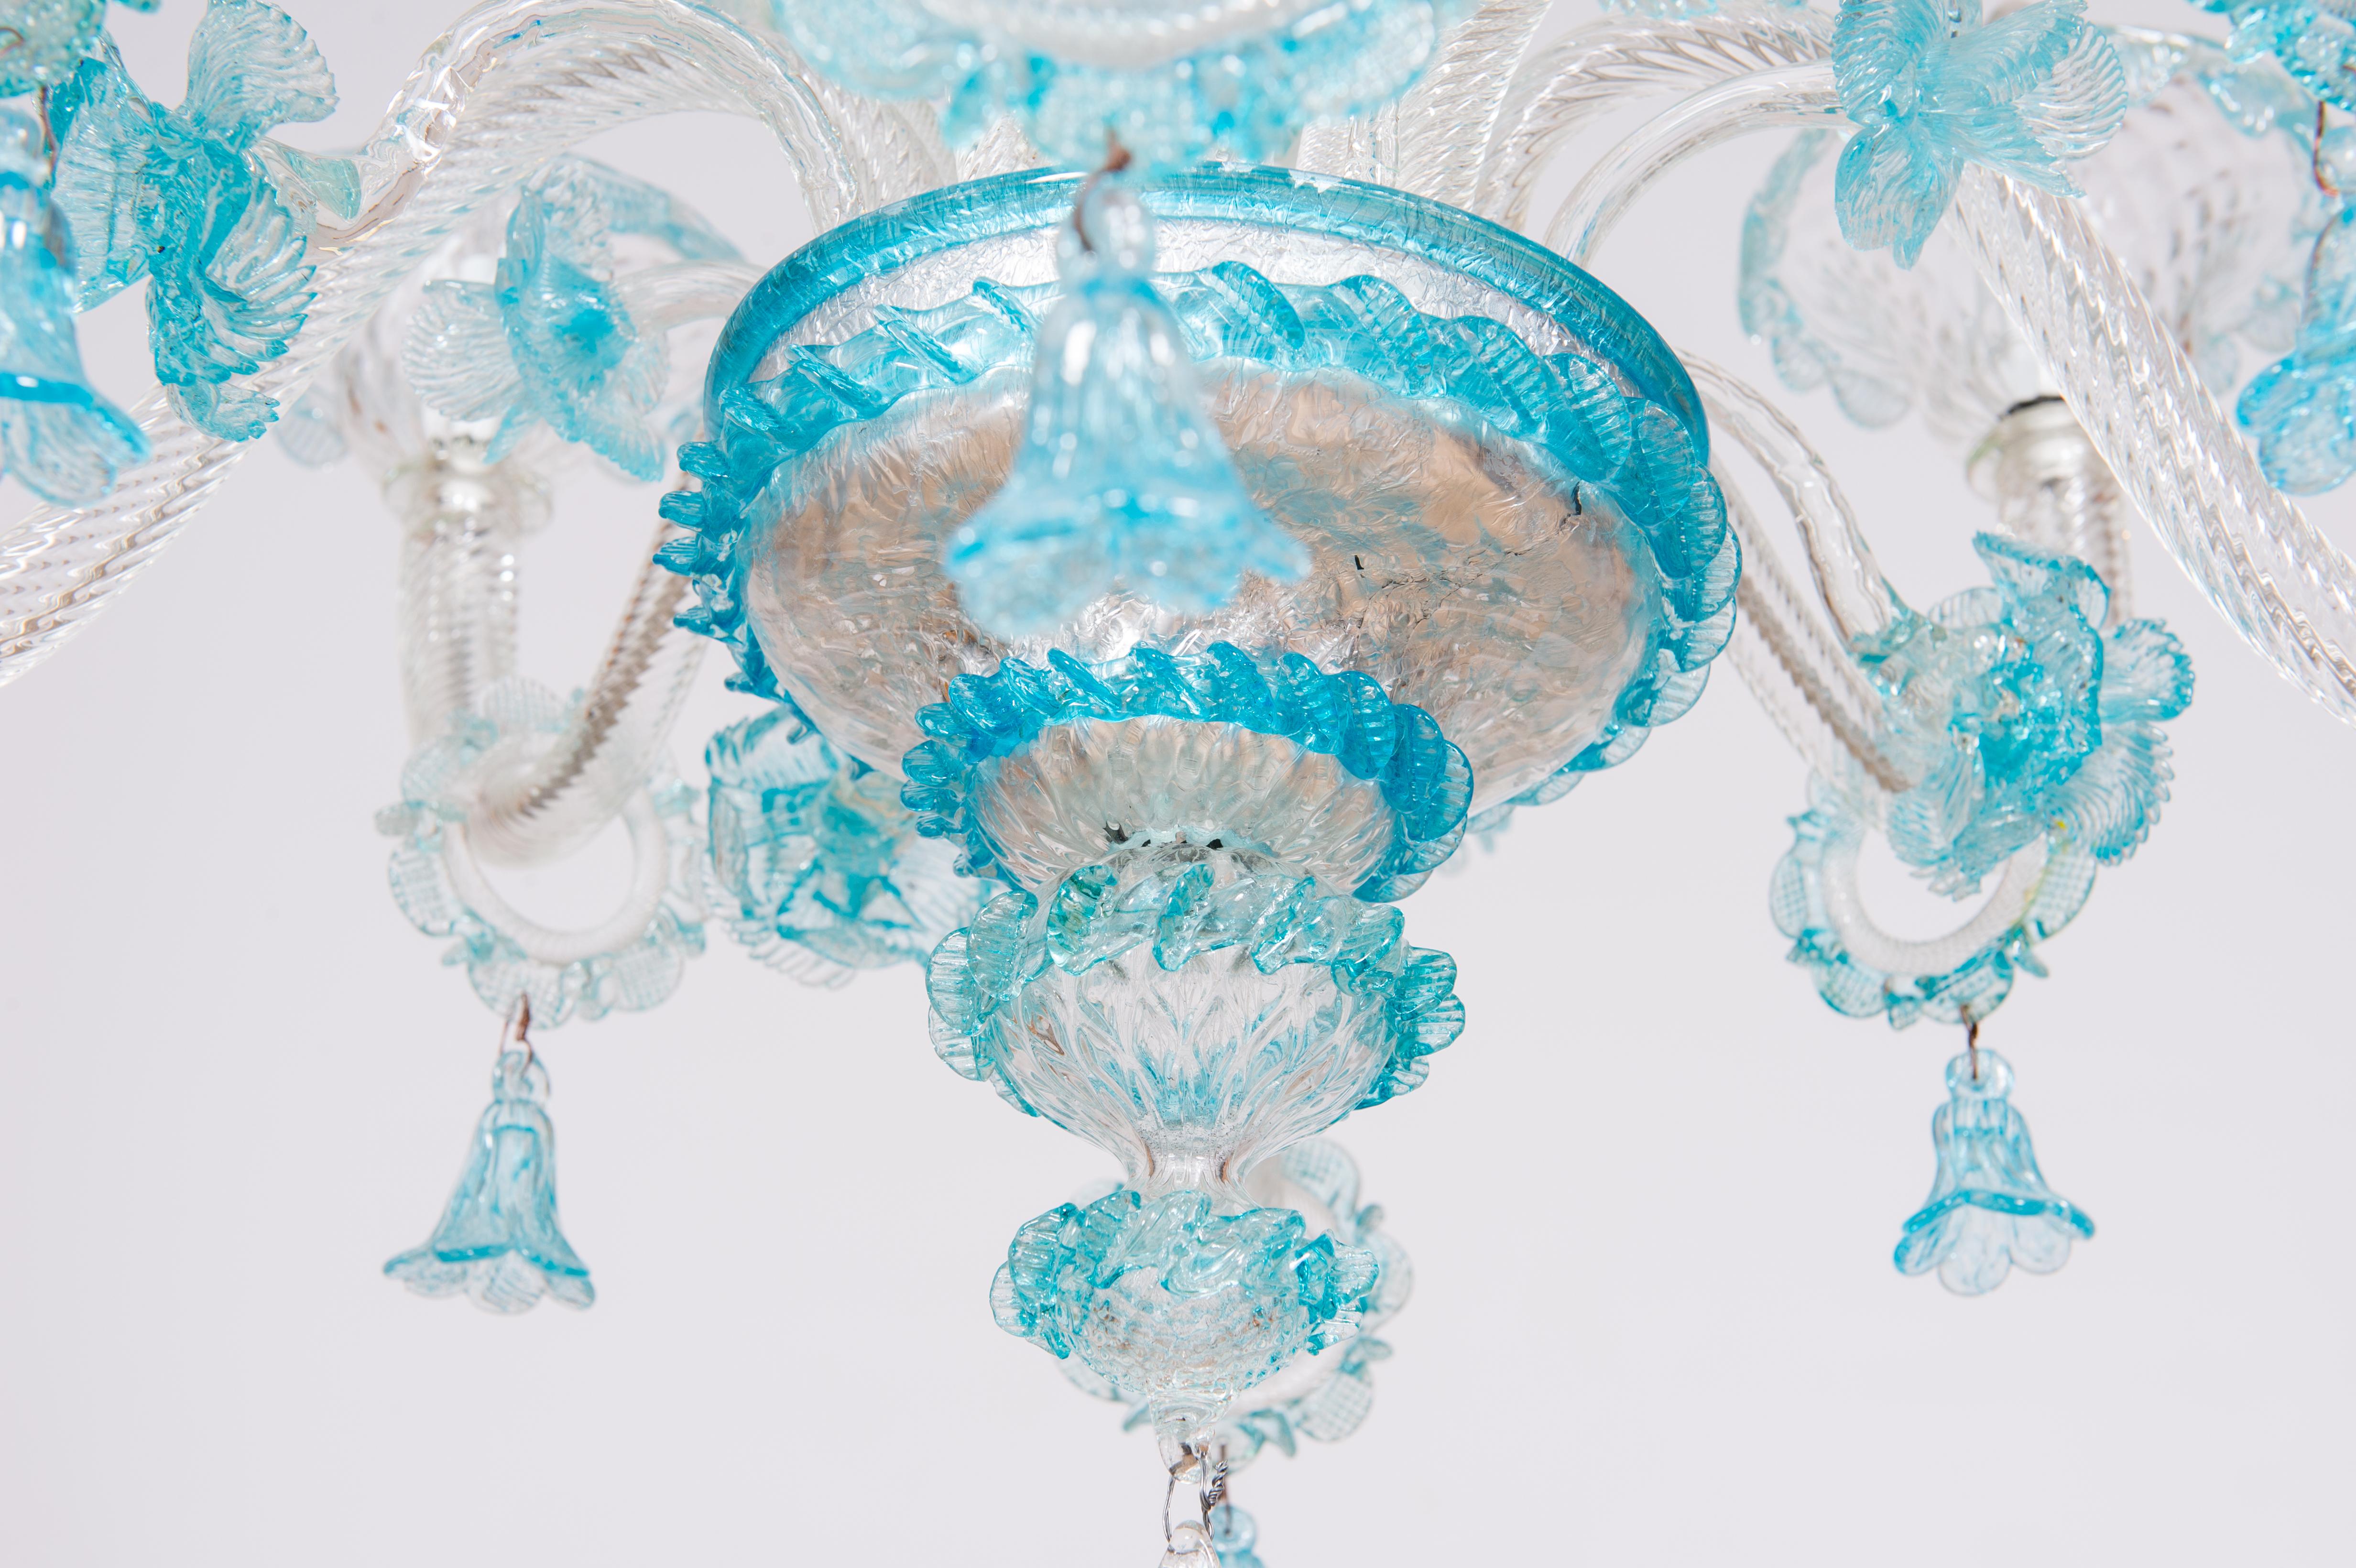 Italian Double Tiered Murano Glass Chandelier in vivid Blue Floral Patterns 1990s Italy For Sale